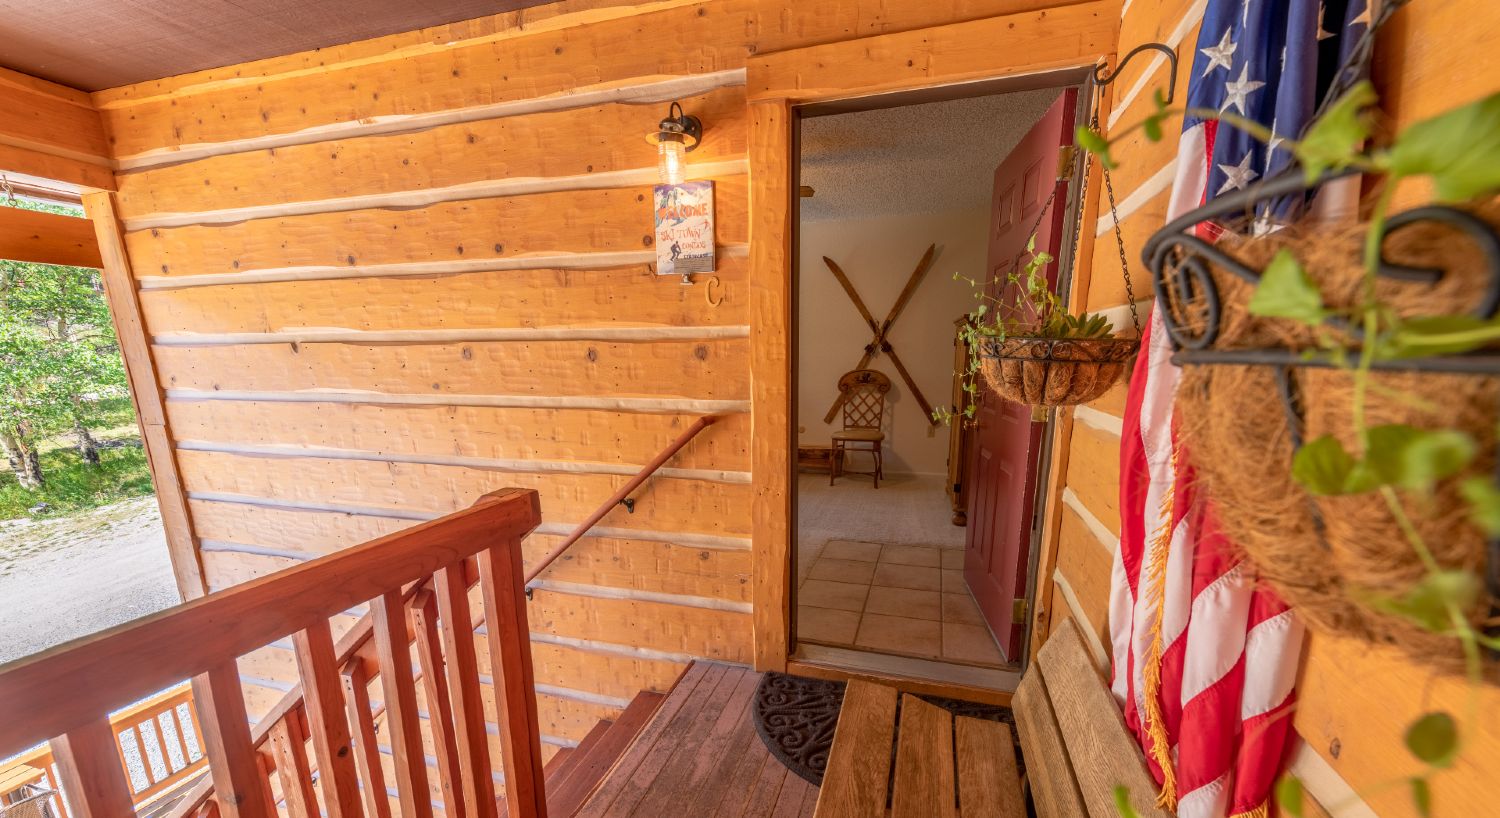 Entrance to condo C with hanging plants on the log siding, American flag standing in a holder, stairs leading down on the left, door open to the living room with antique skis on the wall.